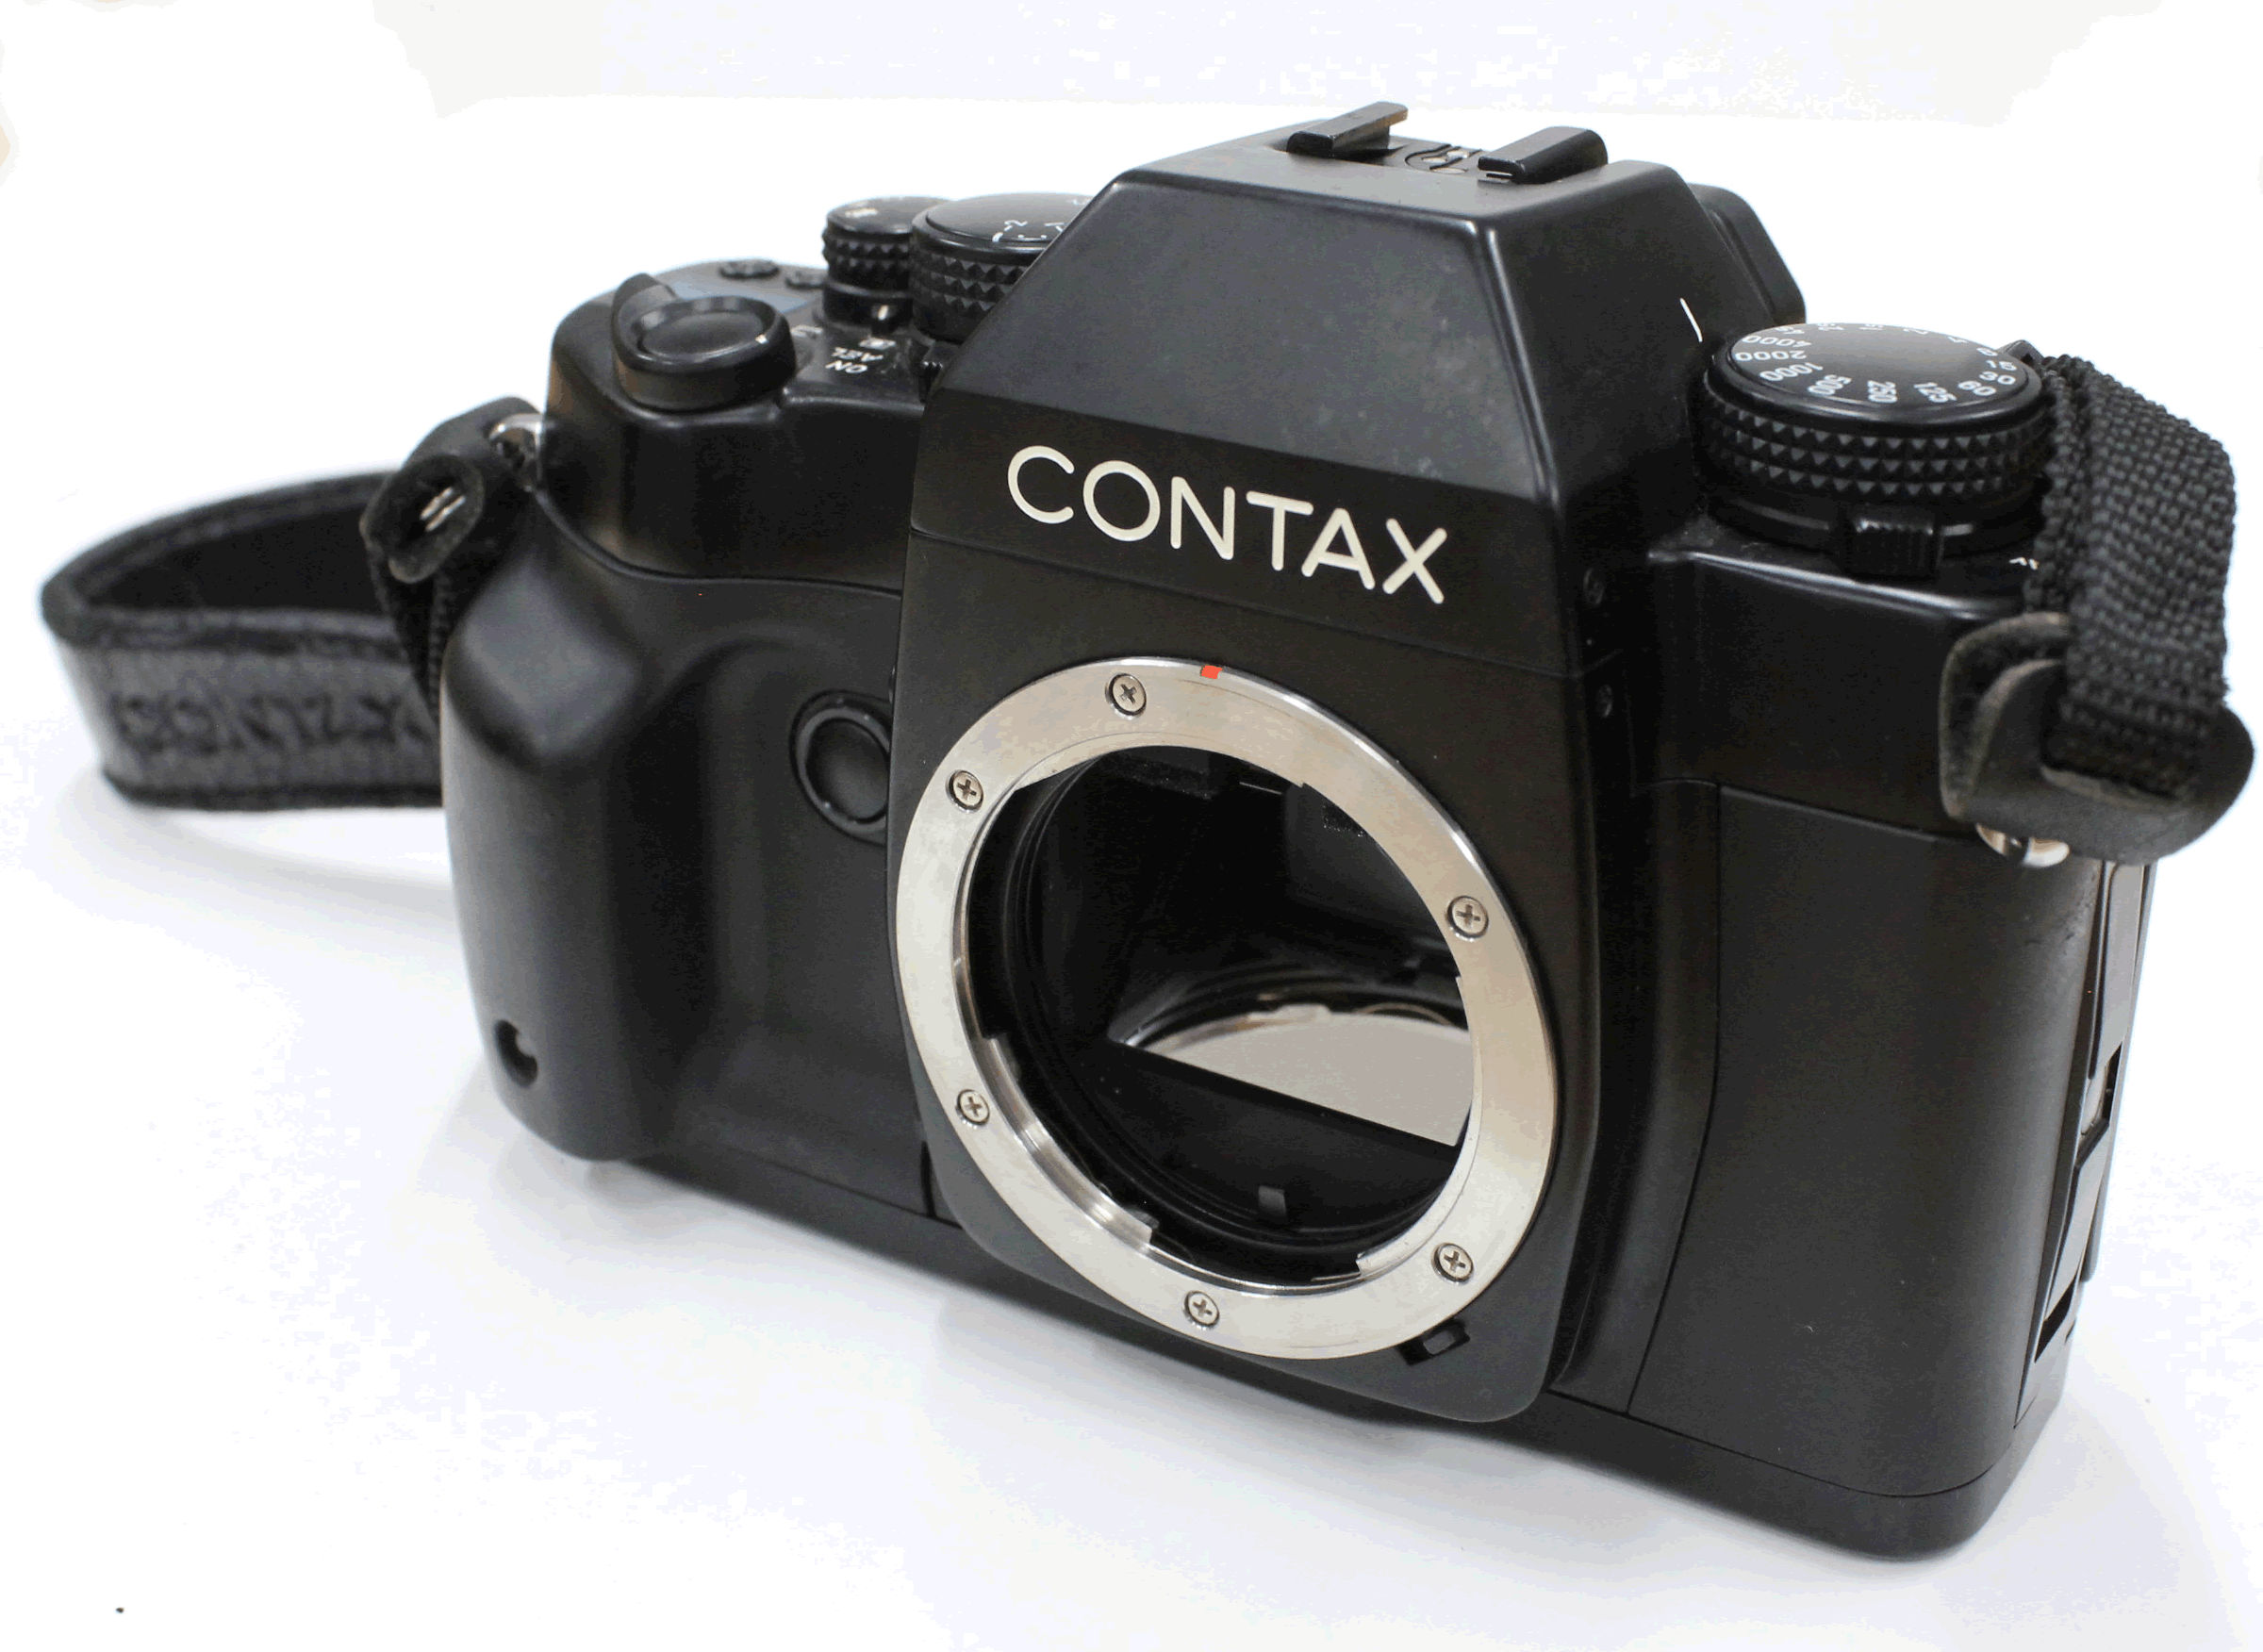  Contax RX 35mm SLR Film Camera Black Body from Japan Photo 0